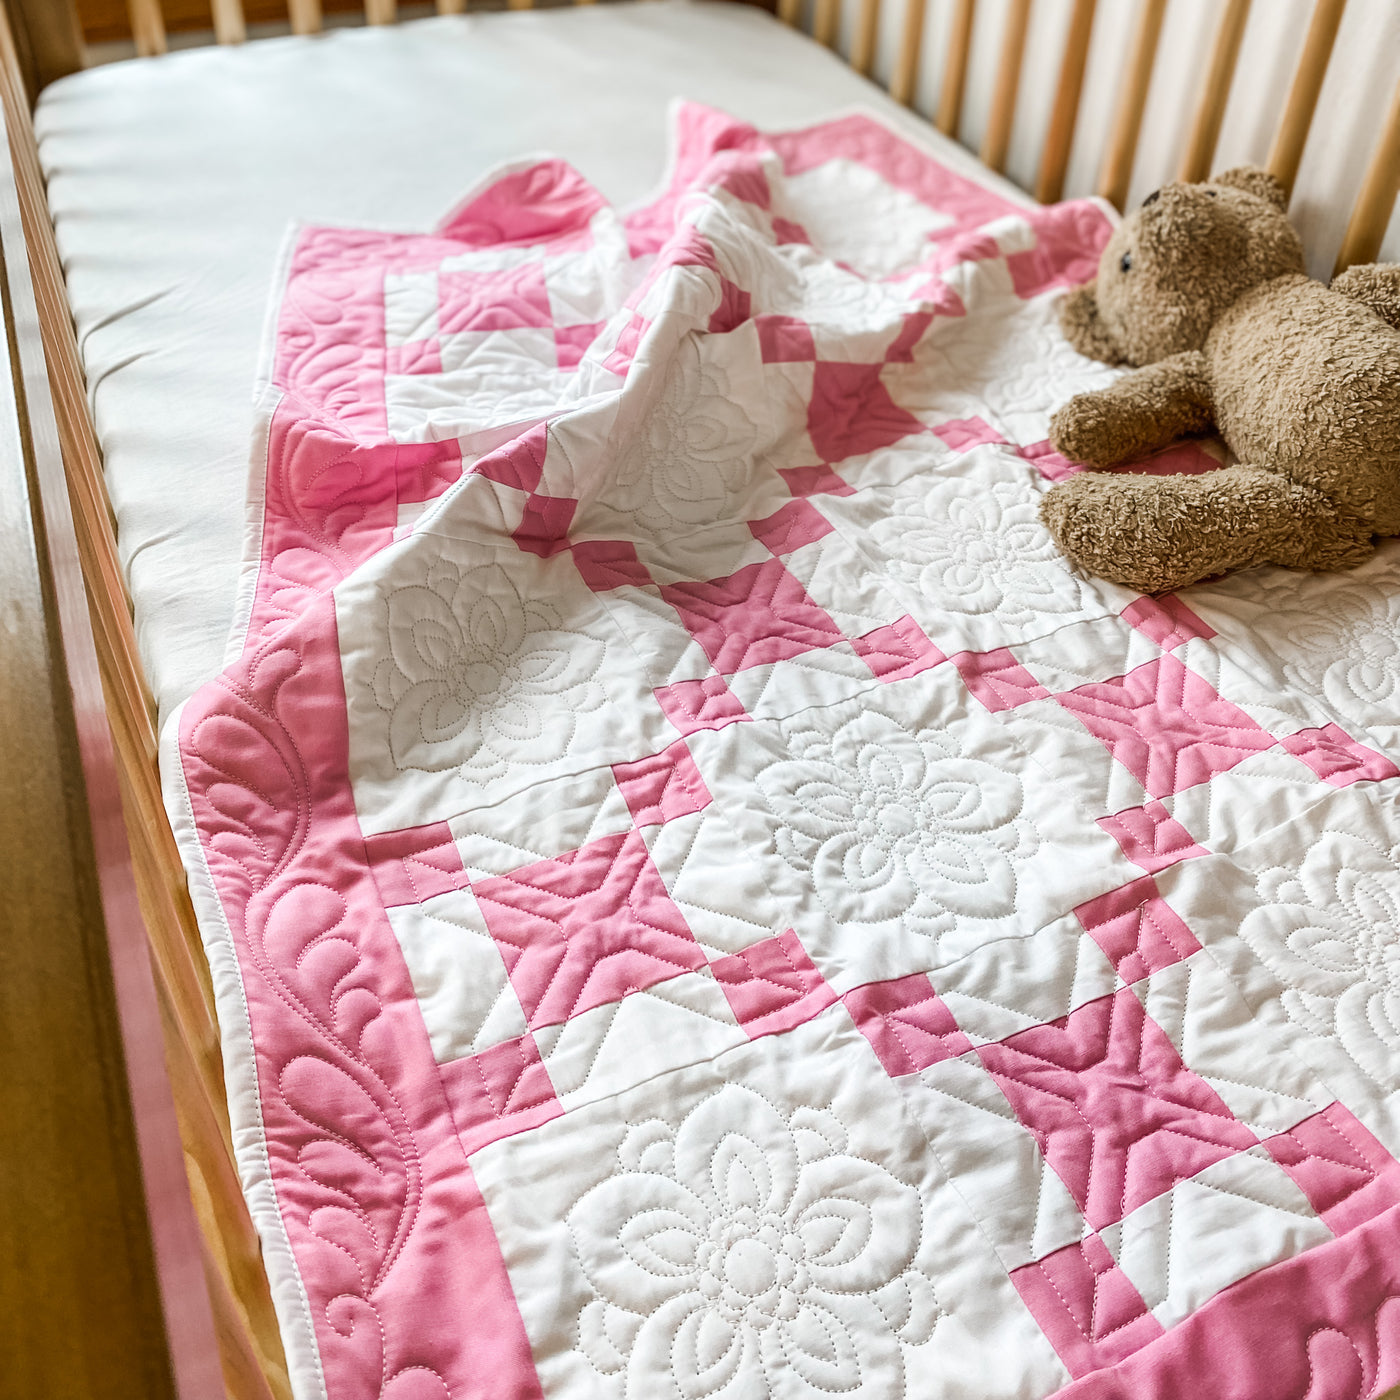 A handmade, heirloom, patchwork of pink nine patch with white background fabric, white backing, 100% cotton batting, Floral top quilting in the white centers, X's in the 9 patch squares, and feathers along the borders, machine top stitched binding, on this crib size quilt